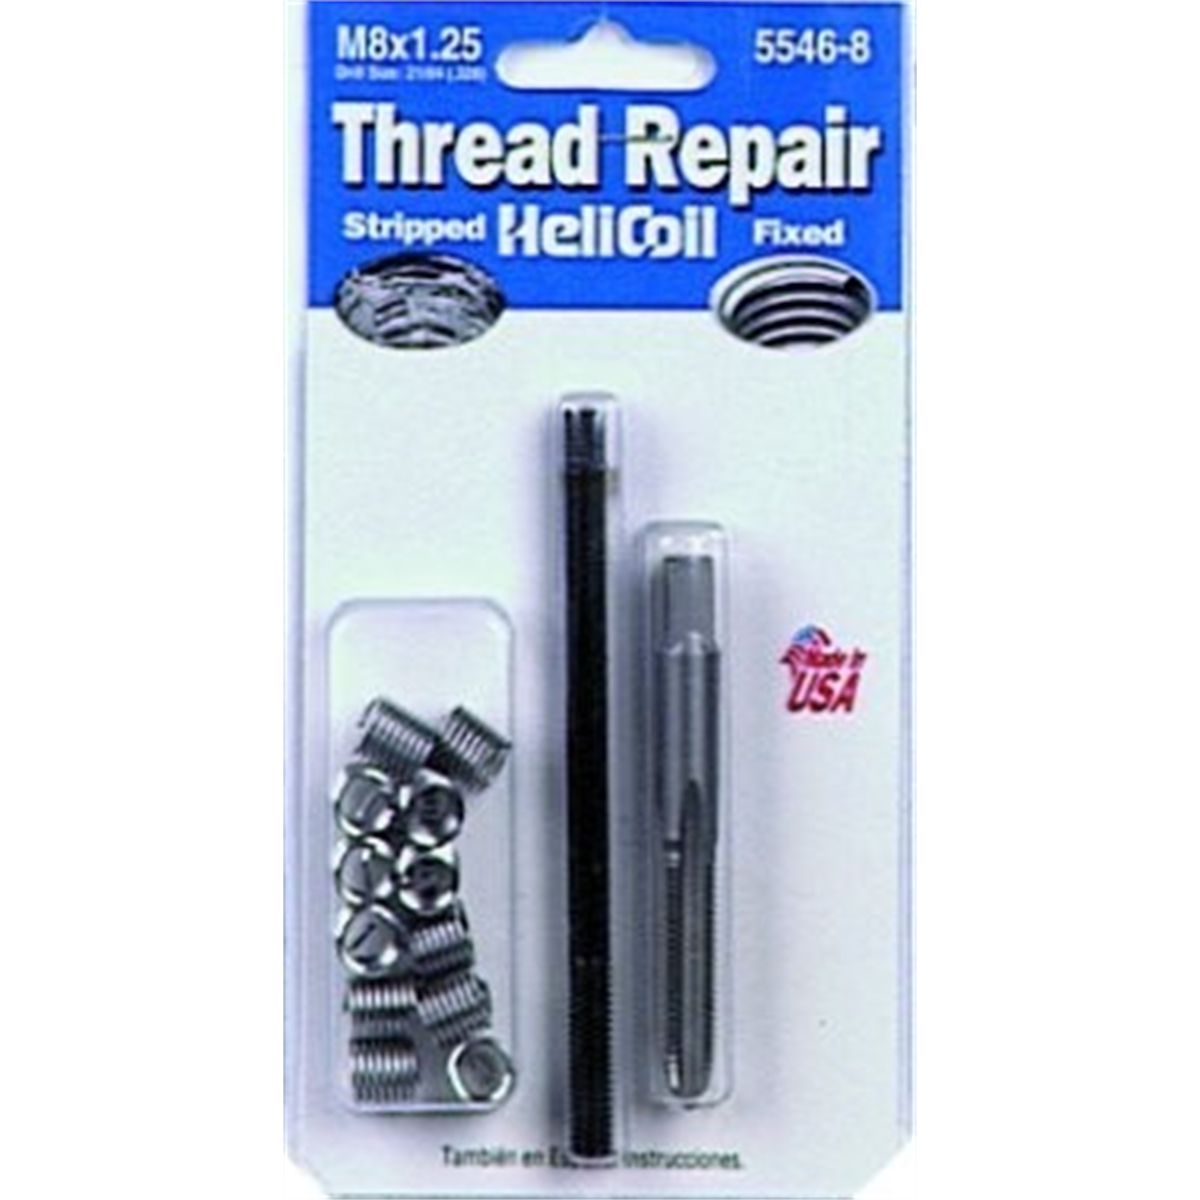 SN_T Helicoil Thread Repair M7 x 1 Drill and Tap 12 Inserts 